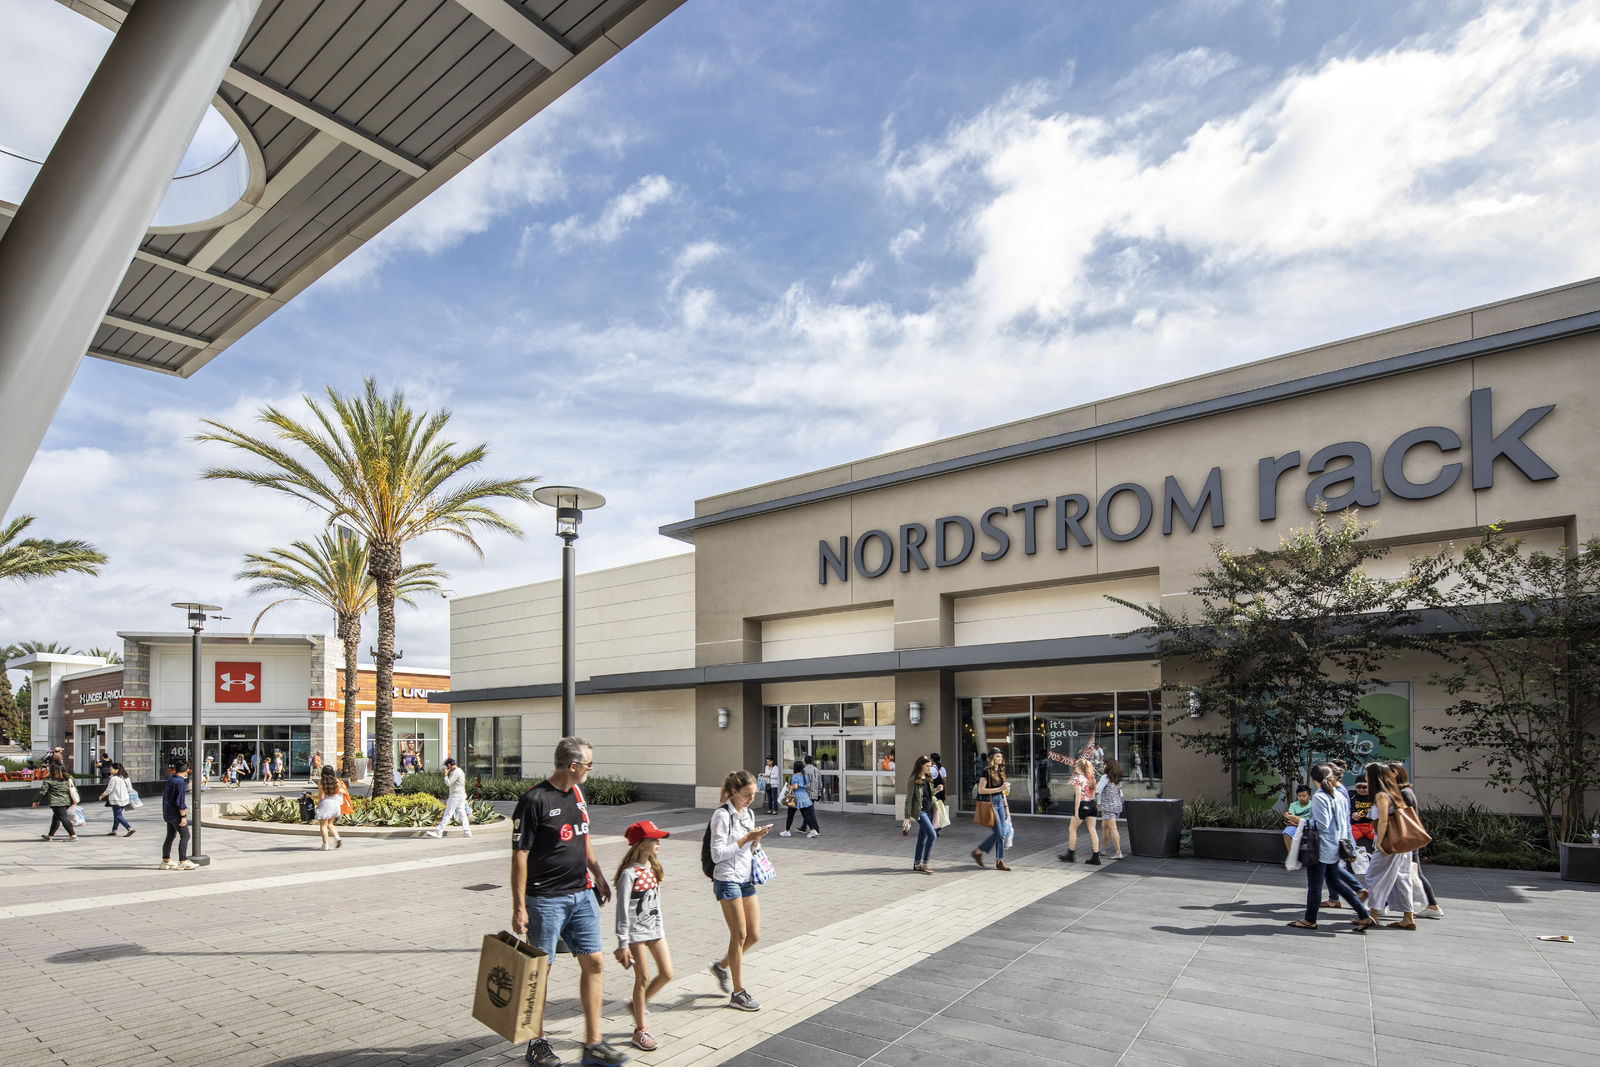 Welcome To The Outlets at Orange - A Shopping Center In Orange, CA - A  Simon Property